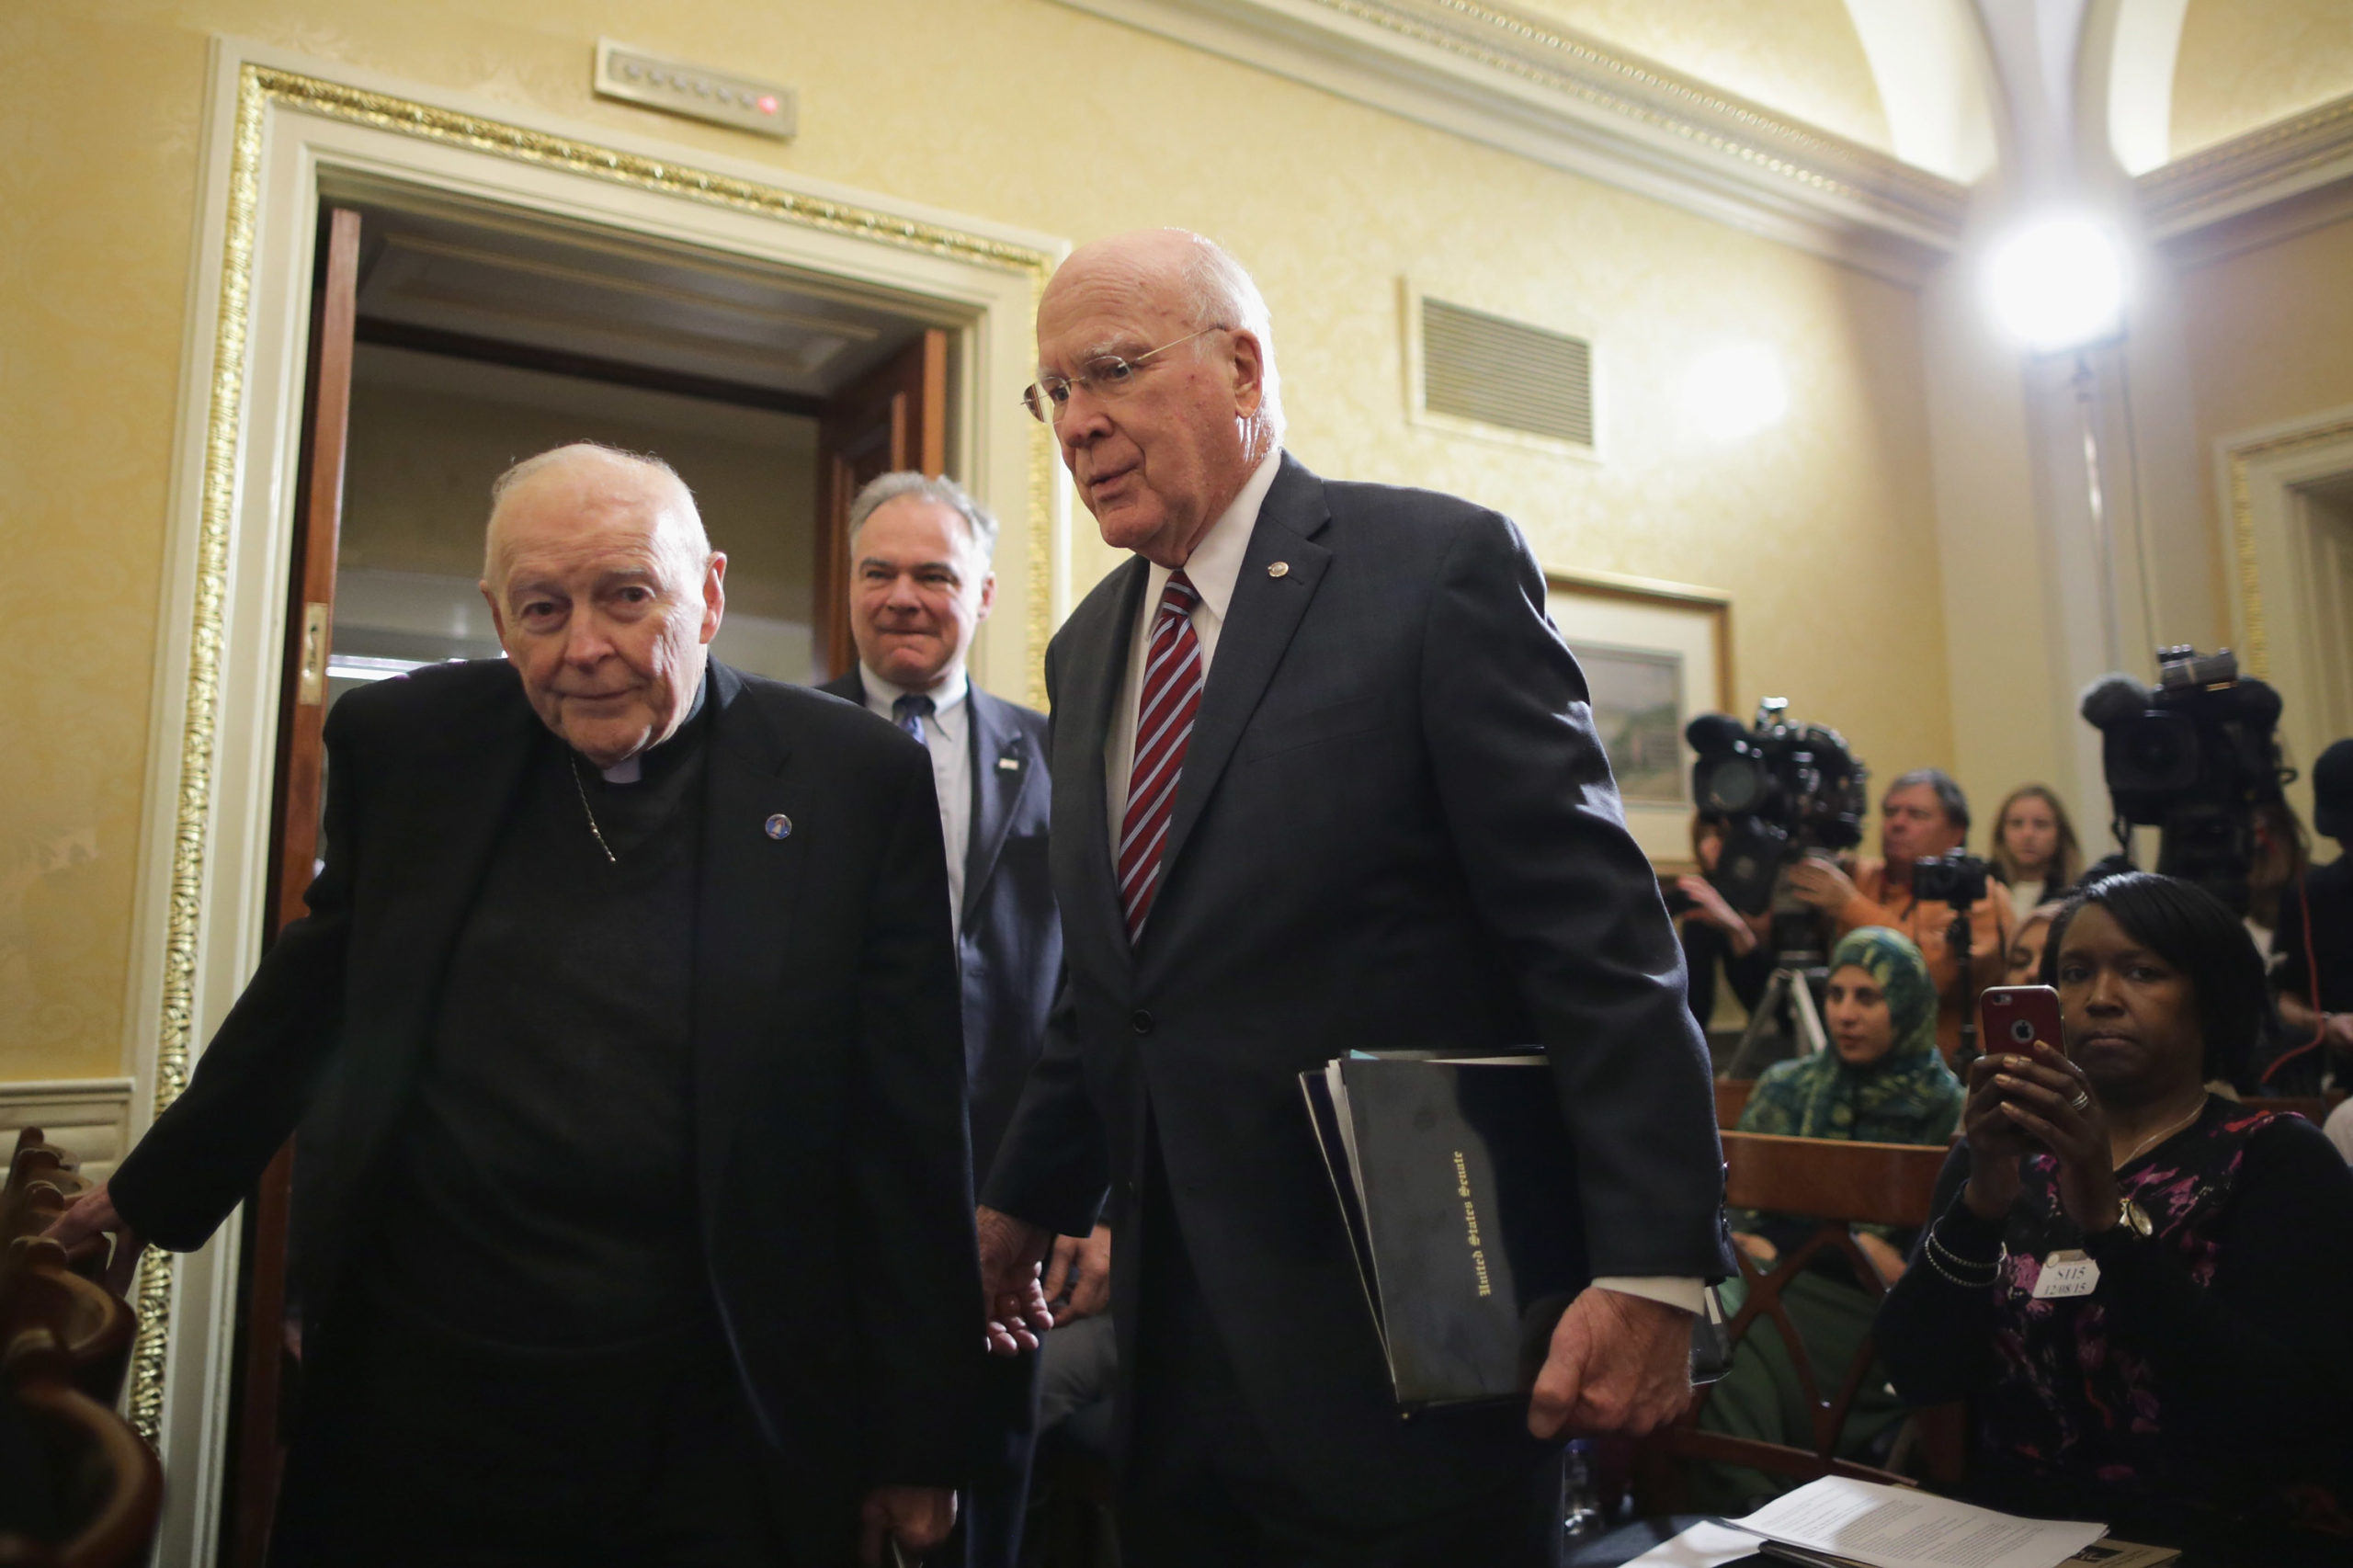 Cardinal Theodore McCarrick walks with Democratic Sen. Patrick Leahy on Dec. 8, 2015 in Washington, D.C. (Chip Somodevilla/Getty Images)